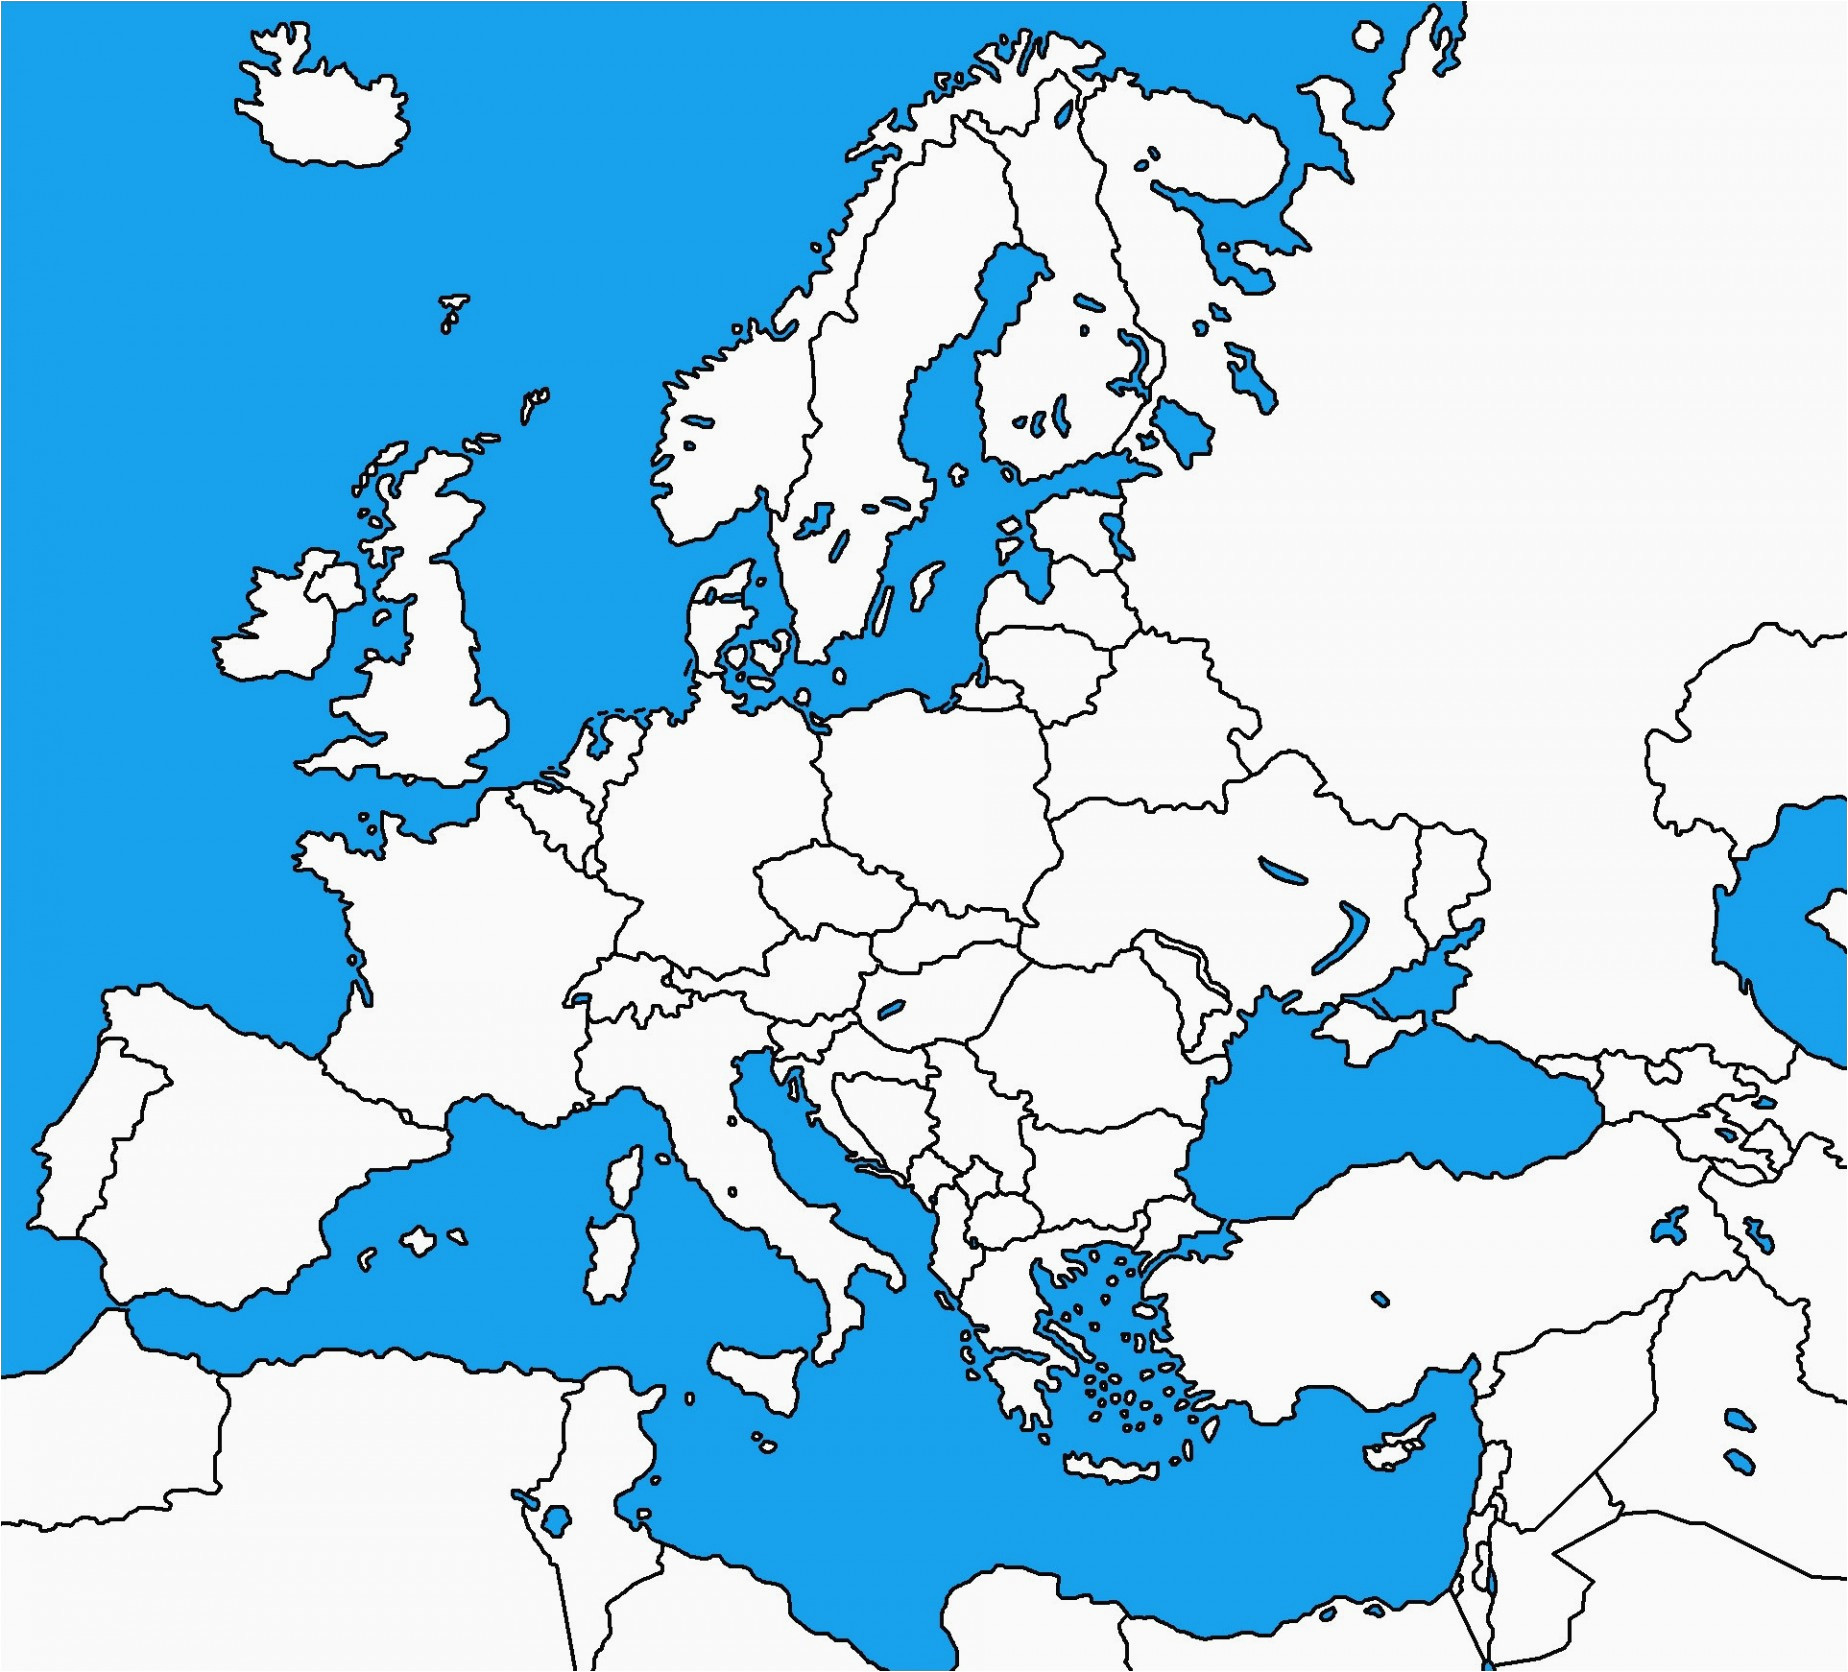 map of europe unlabeled climatejourney org